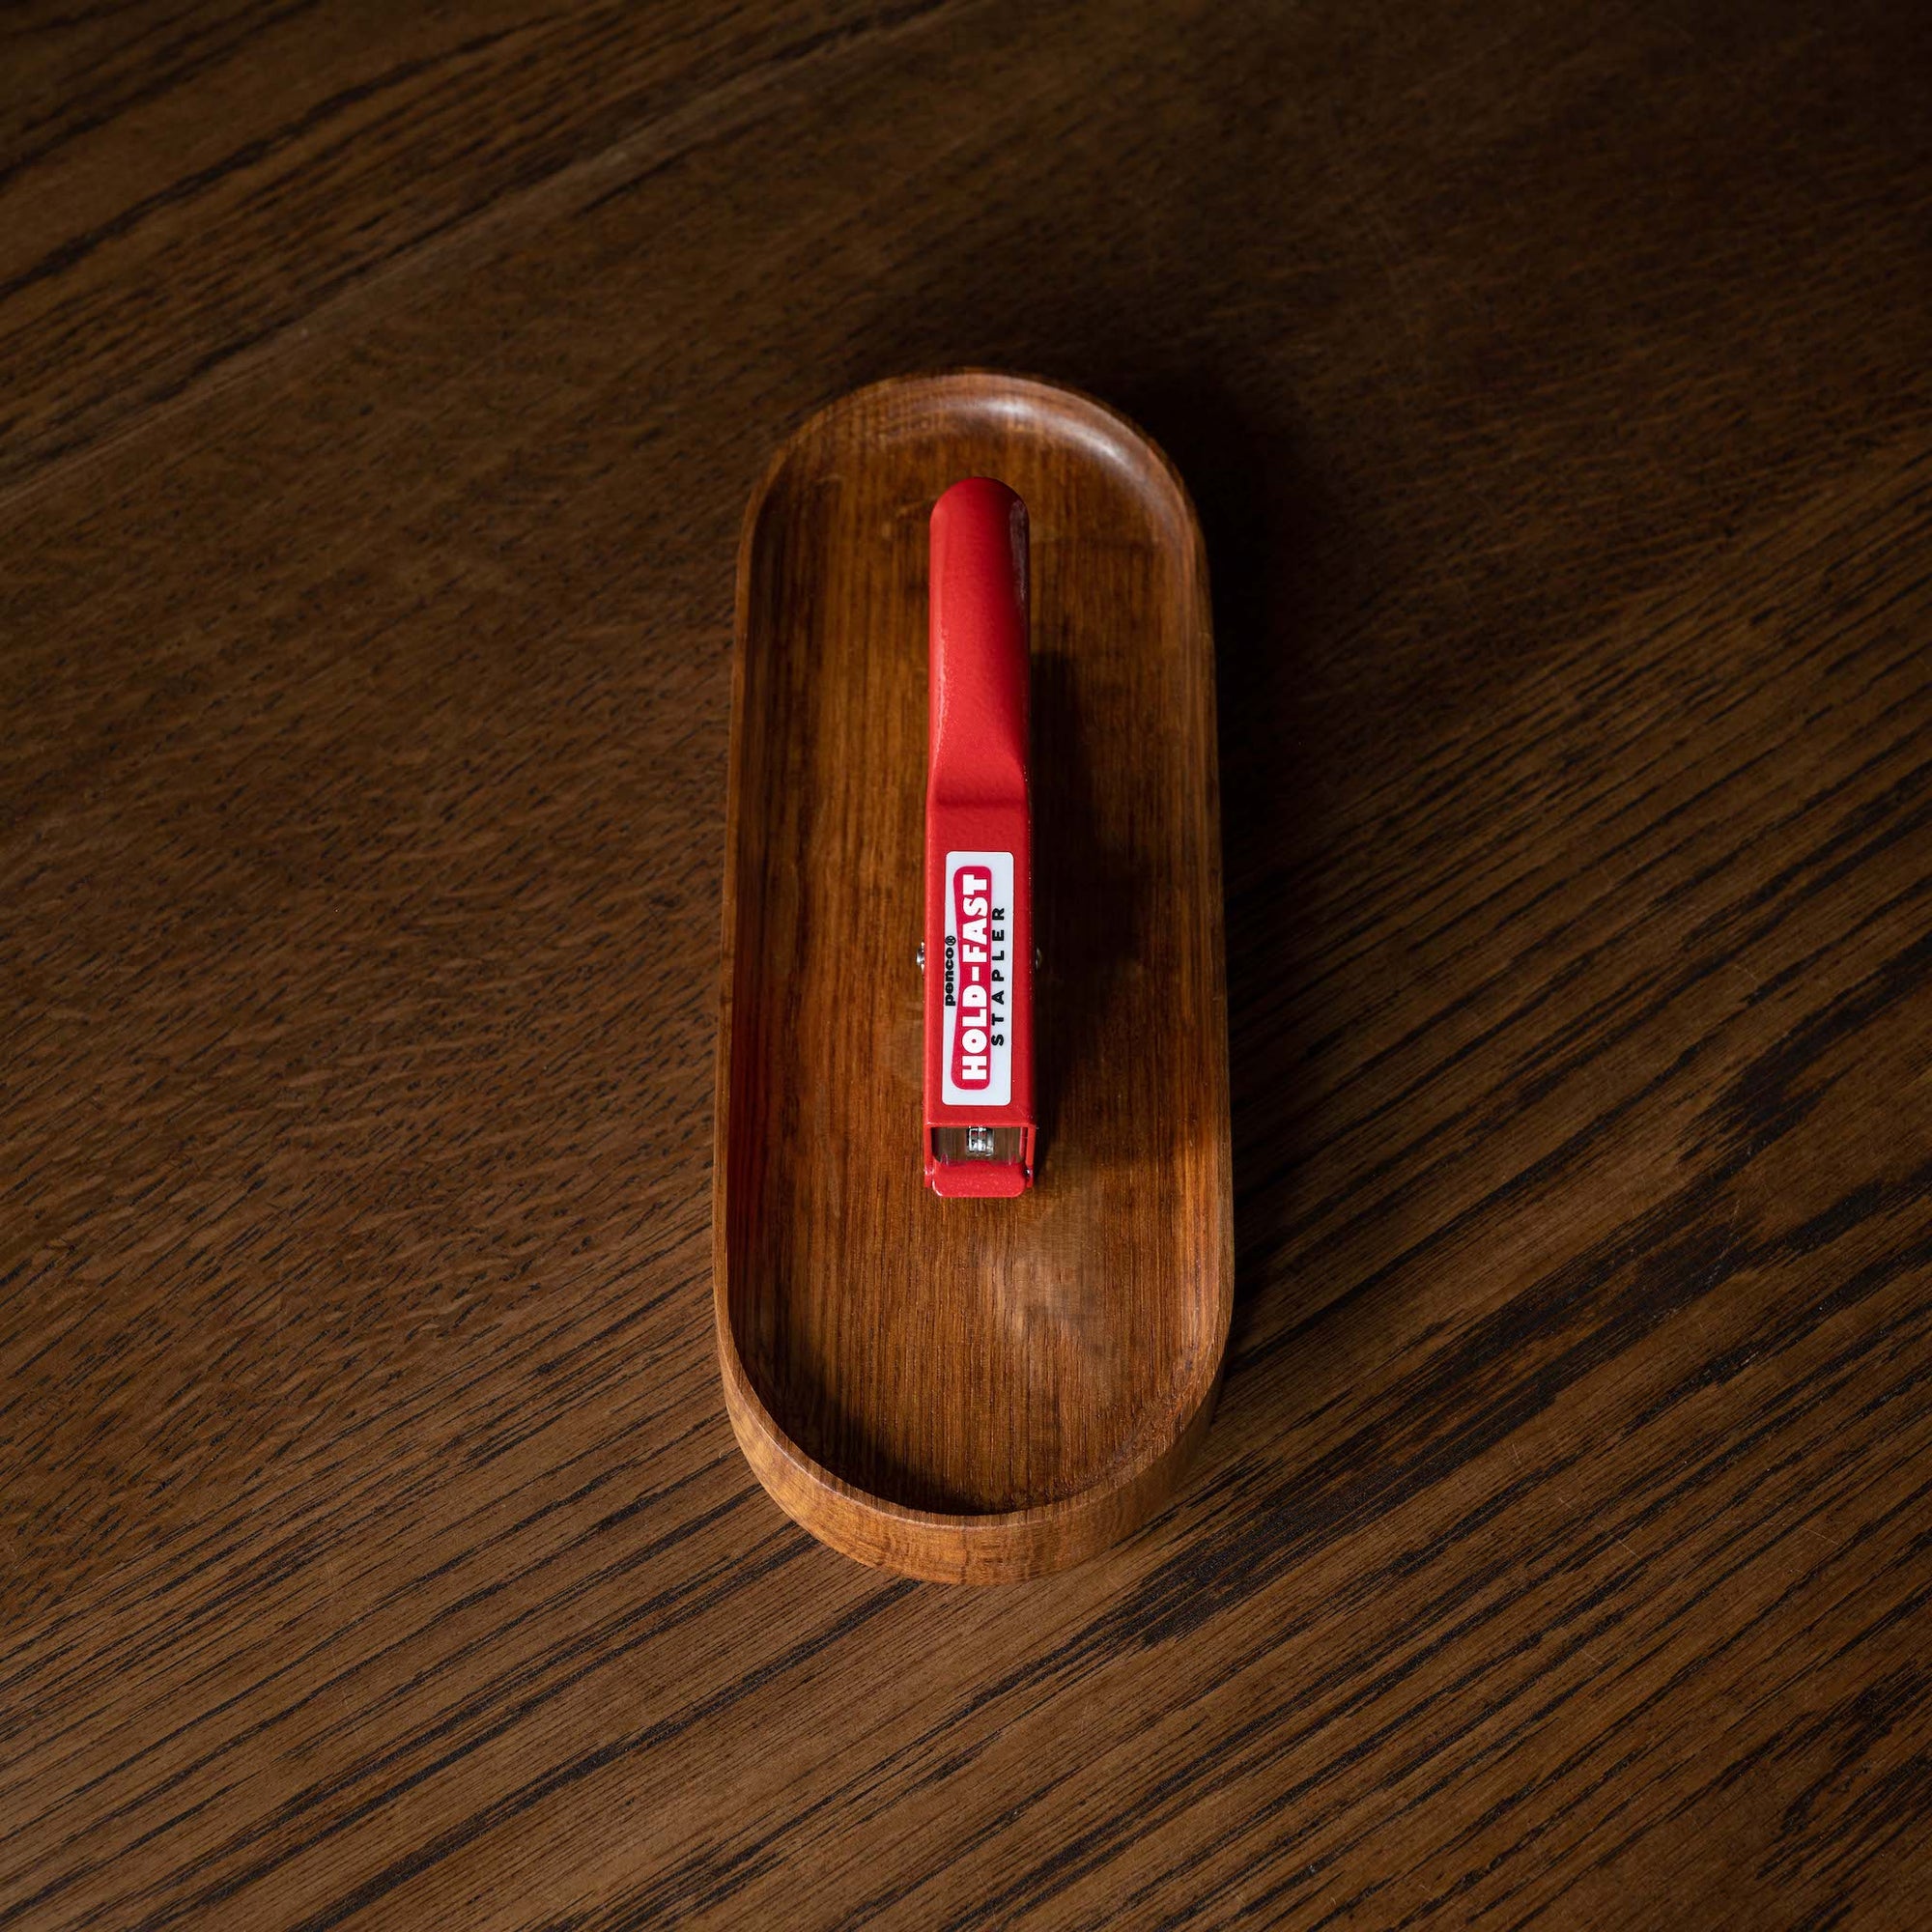 Top view of Penco Red Stapler on pen tray